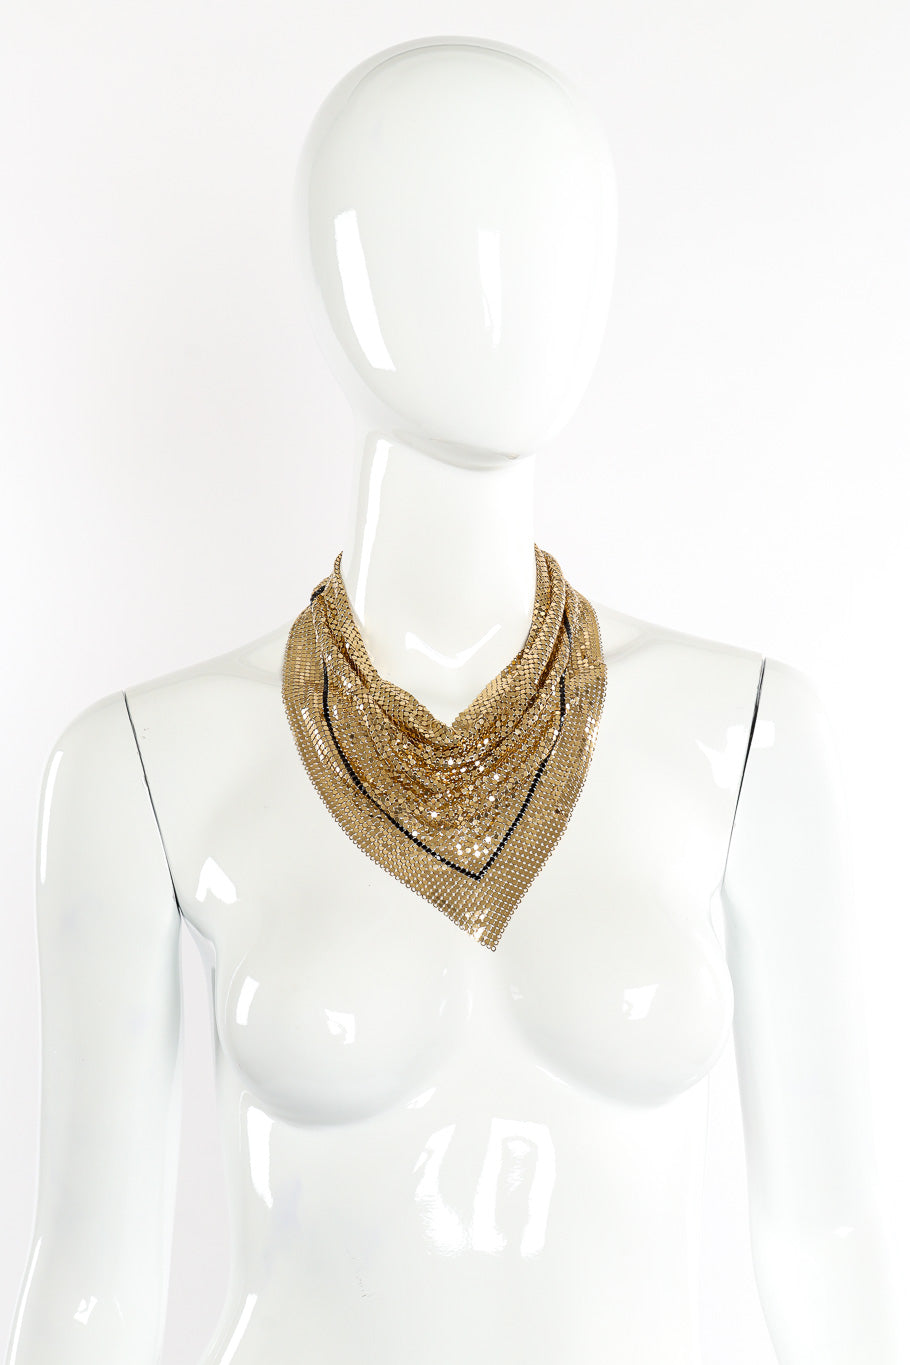 Chain mesh necklace by Whiting & Davis on white background on mannequin neck  @recessla